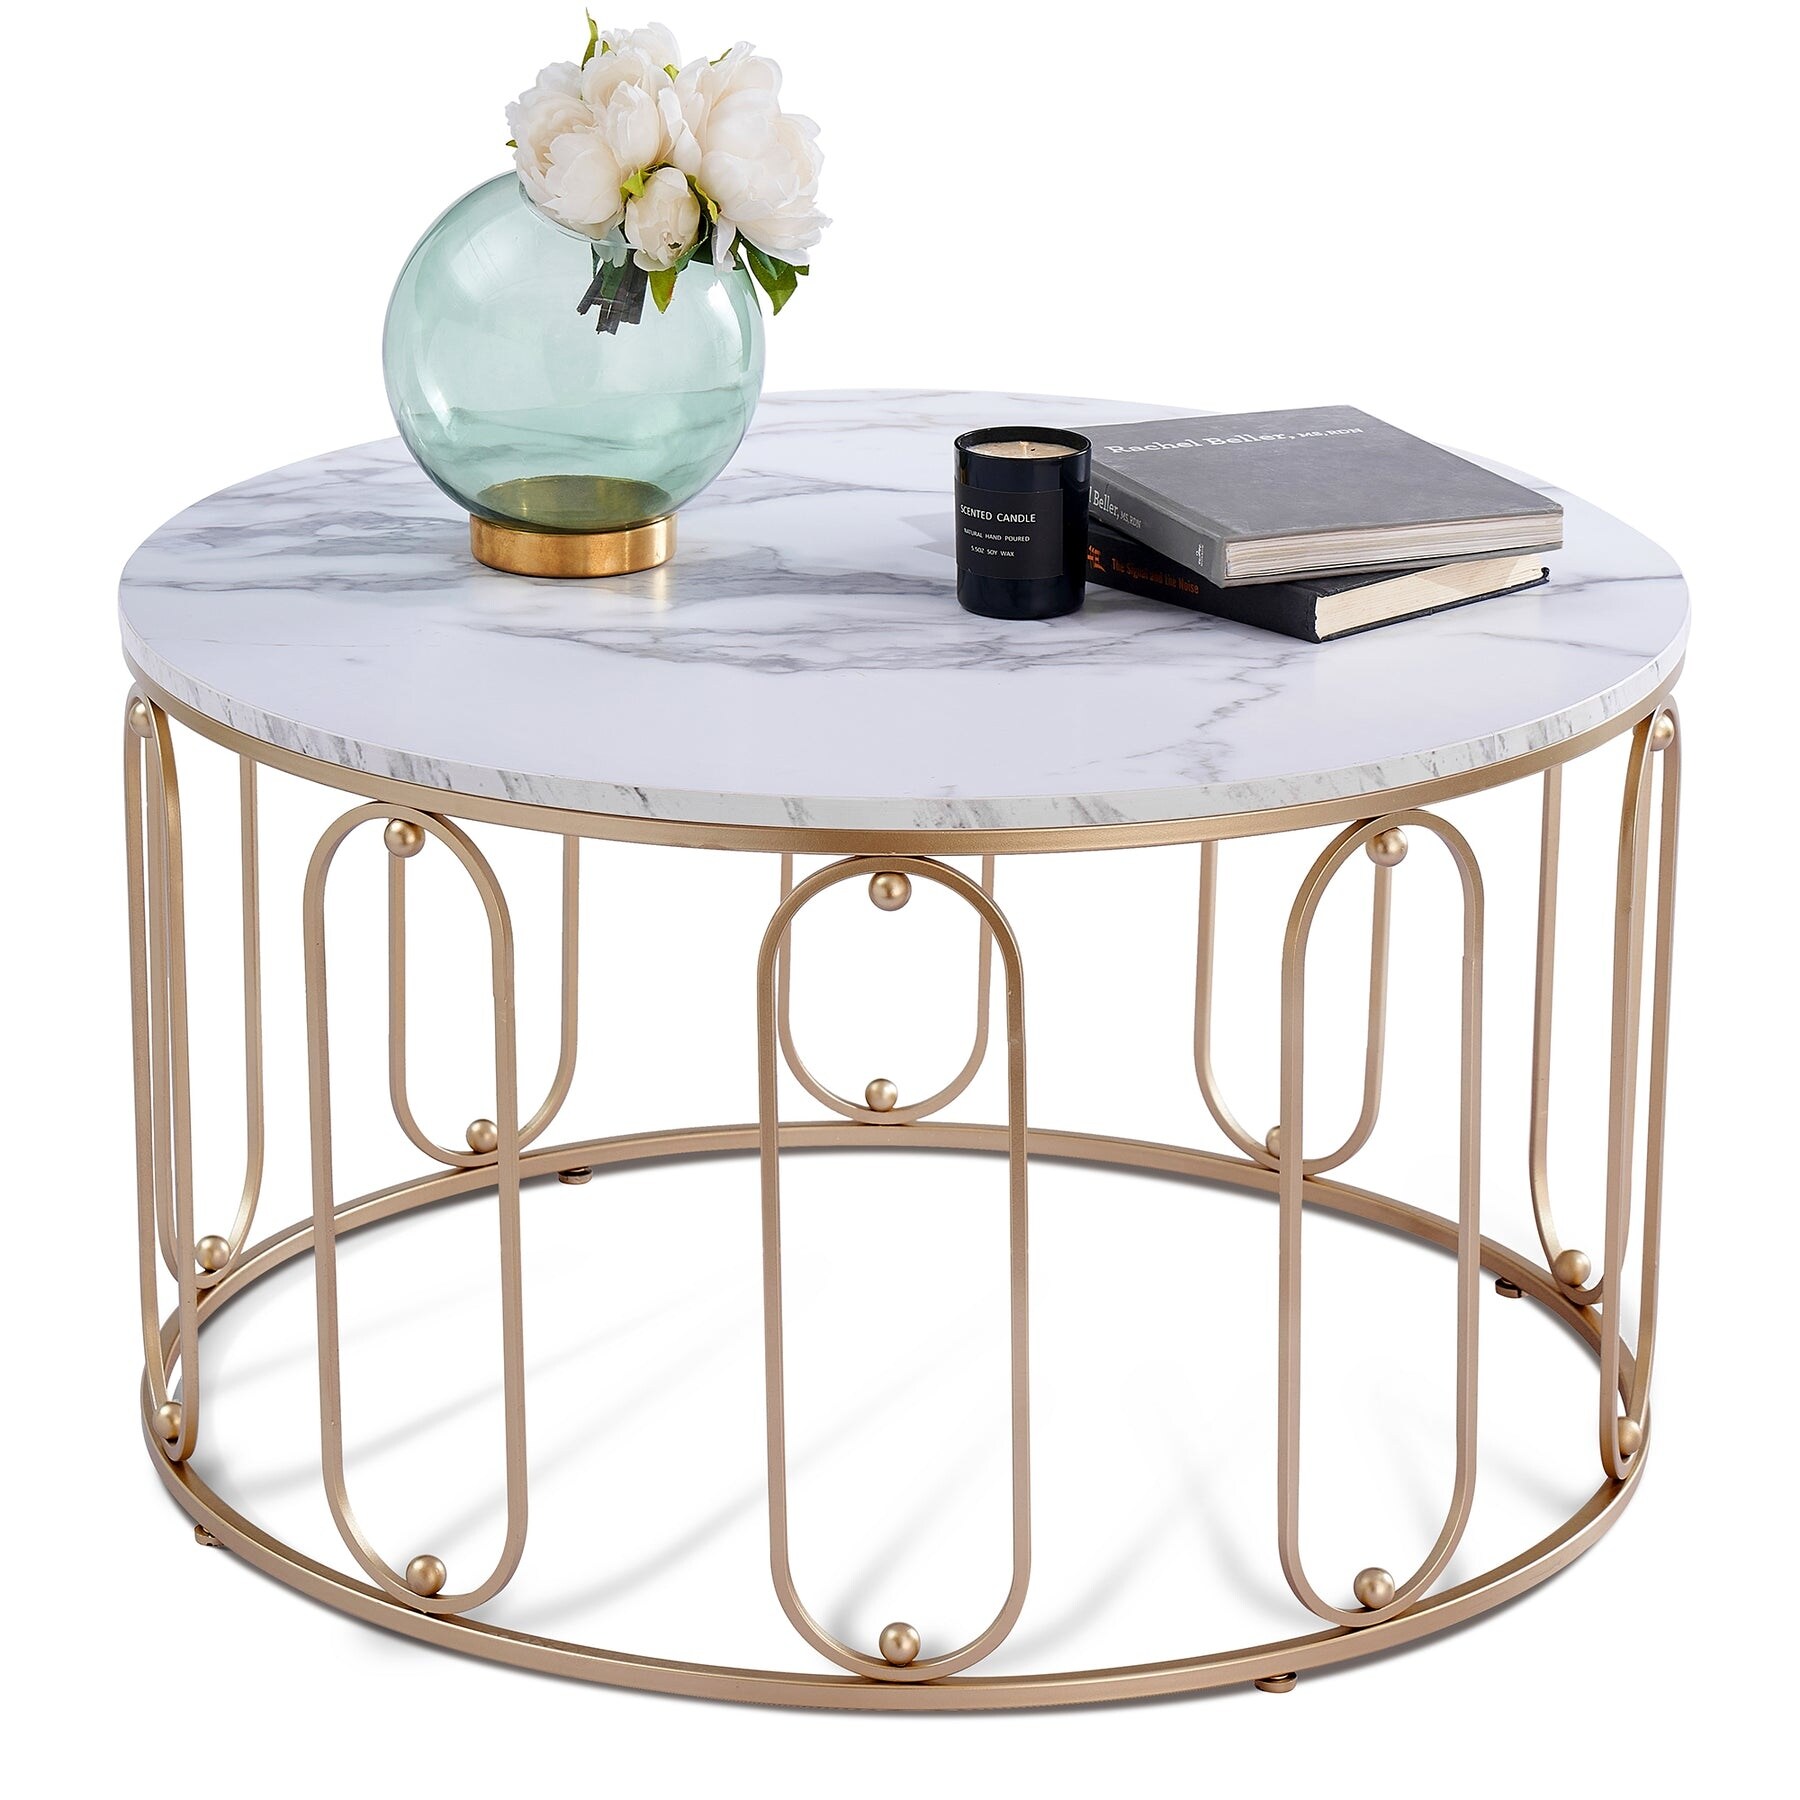 1/2 Tier Coffee Table Round Side Table Modern Occasional Tea Tables Balcony Room 